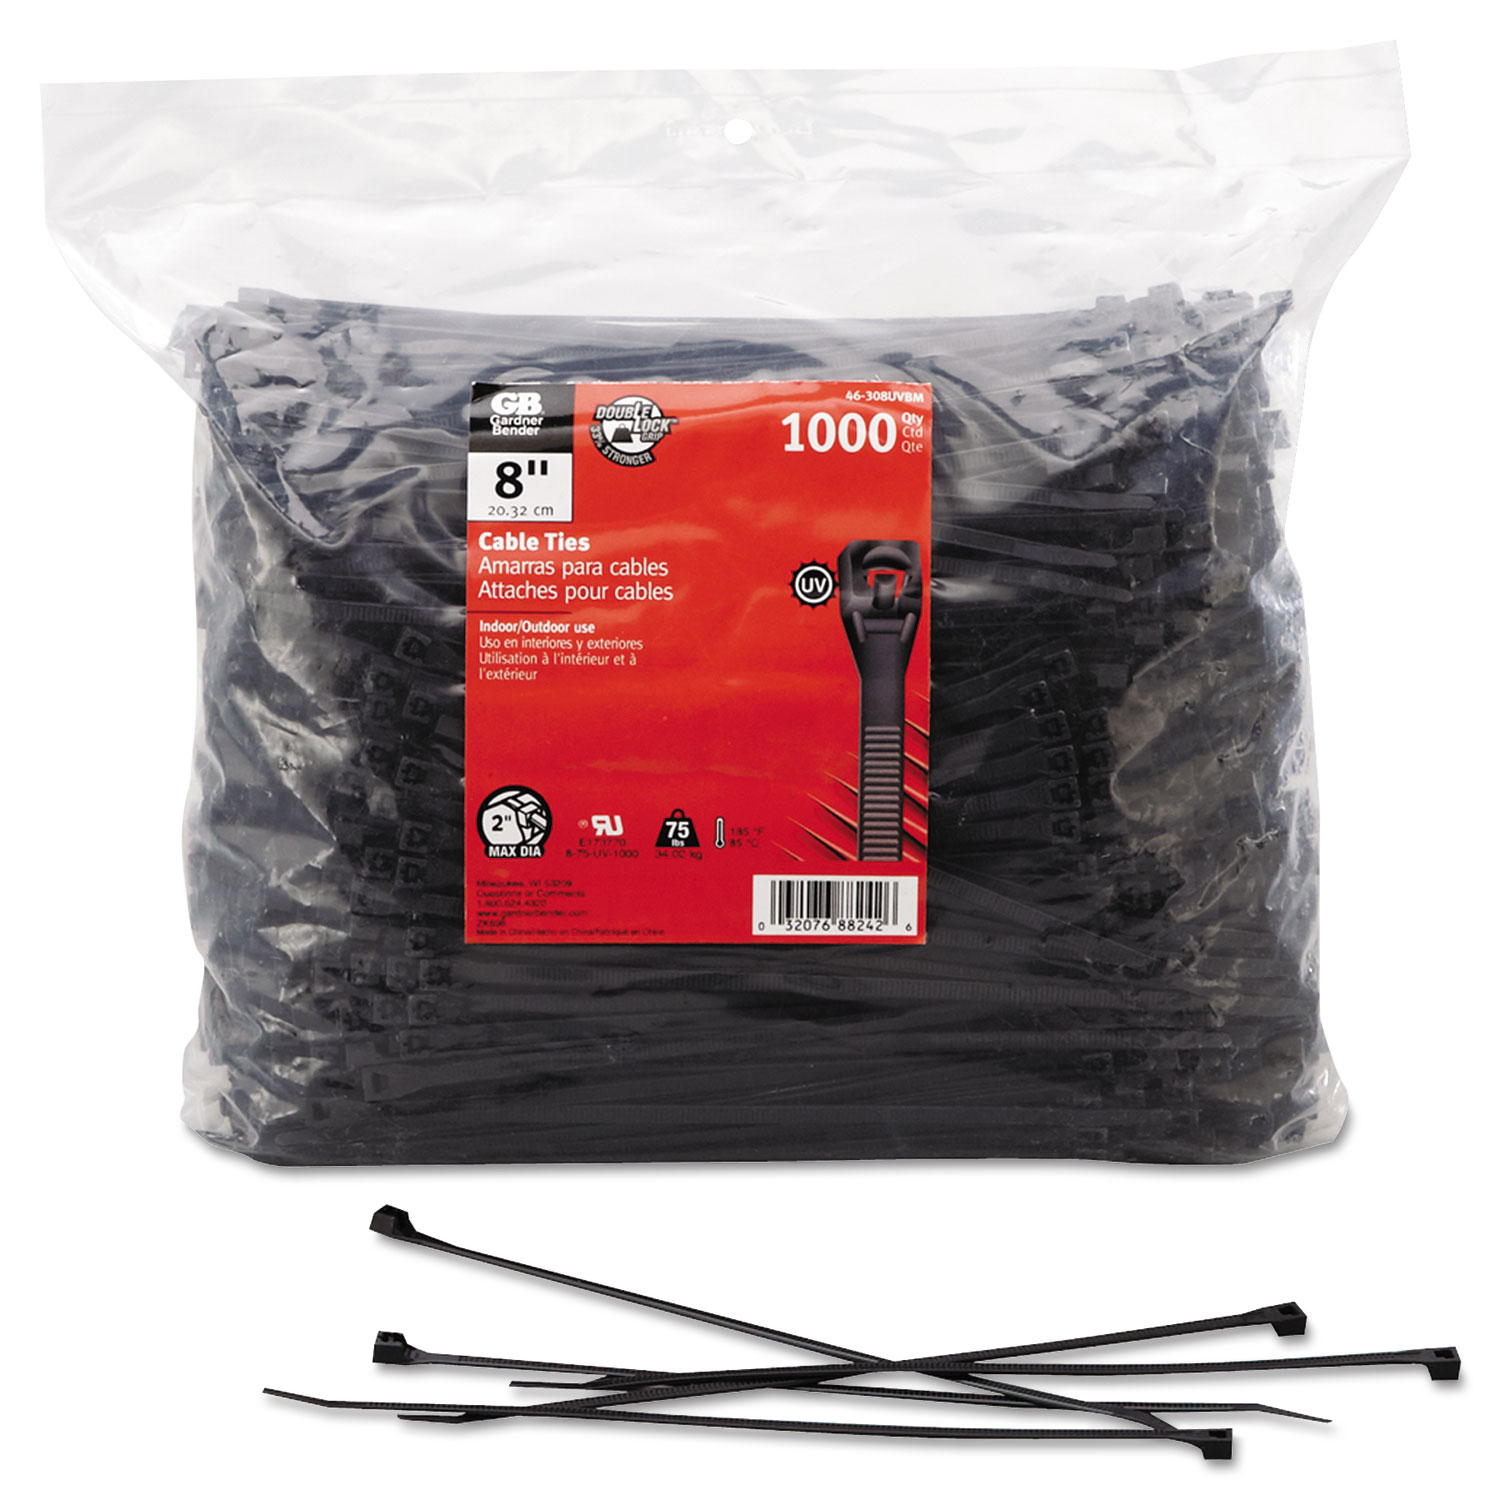  GB 46-308UVBMN Standard Cable Ties, 8 Long, 0.17 Wide, 0.06 Thick, UV Black (GDB46308UVBMN) 